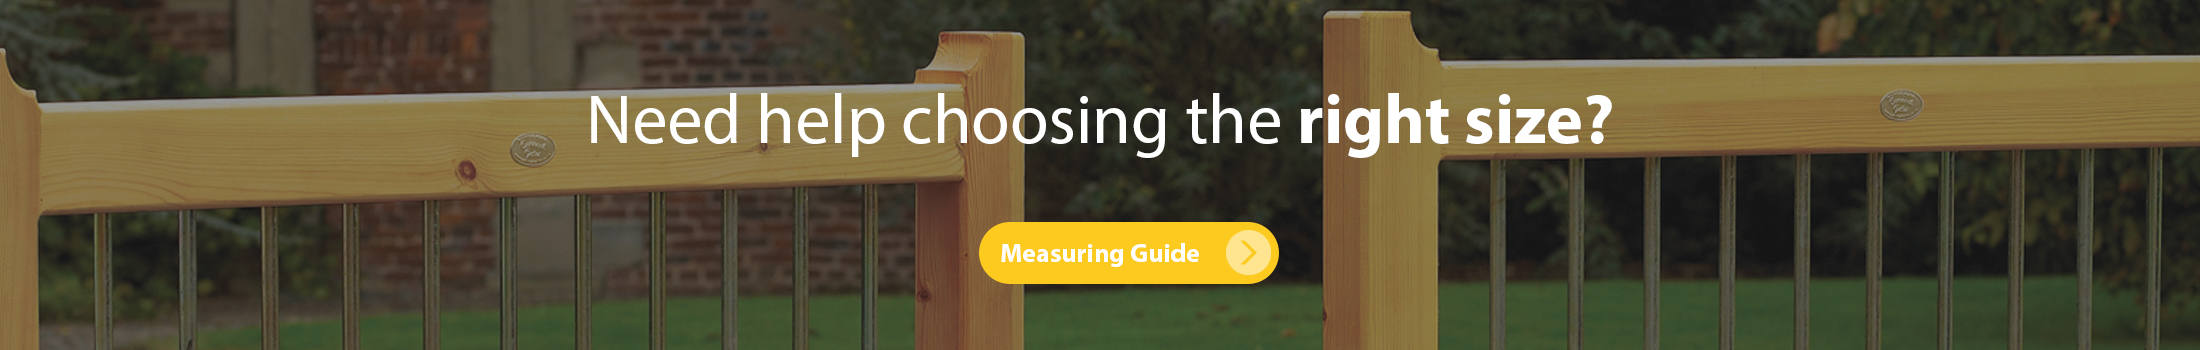 Take a look at the measuring guide for help with sizes